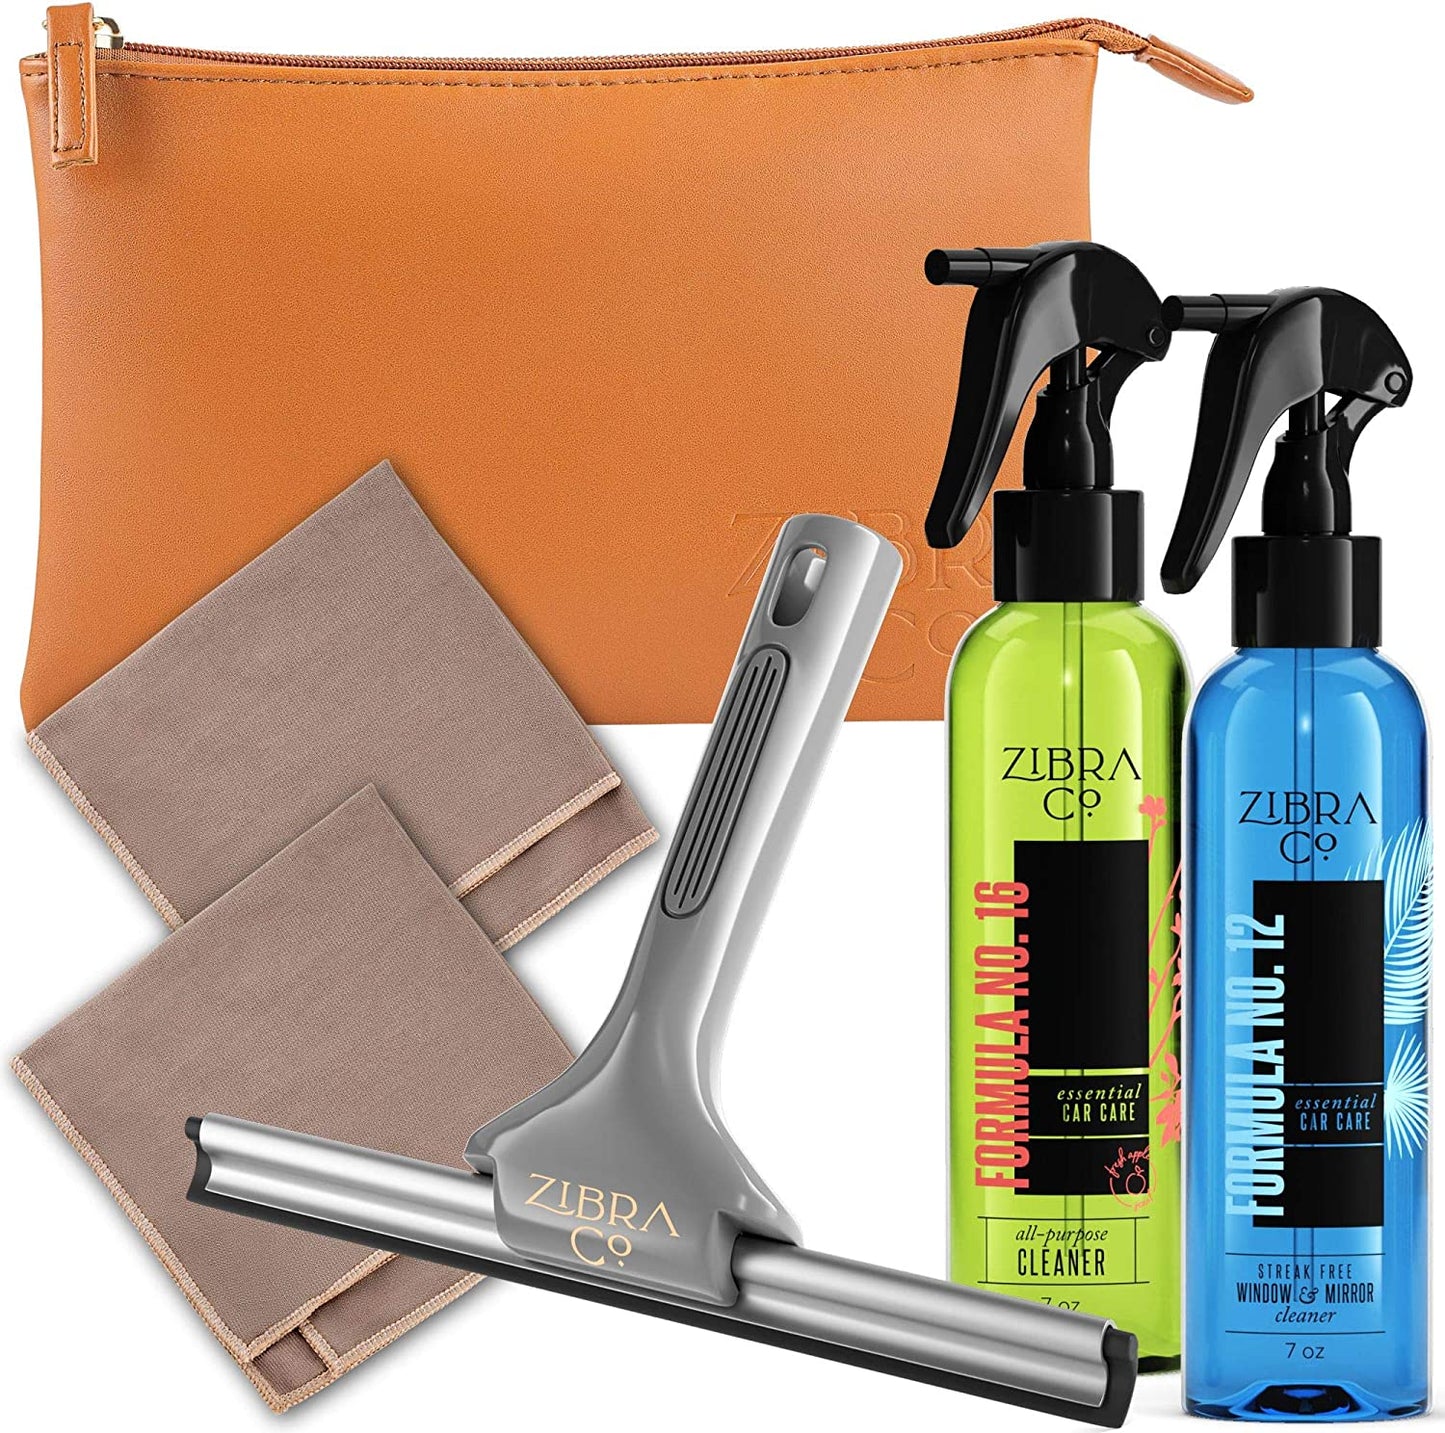 Car Cleaning Kit - All Purpose Cleaner Spray, Window Cleaner, Squeegee Scrubber, 2 Microfiber Glass Cleaner Cloth, Genuine Leather Pouch - Auto RV Accessories for Inside Surfaces, Glass, Windshield